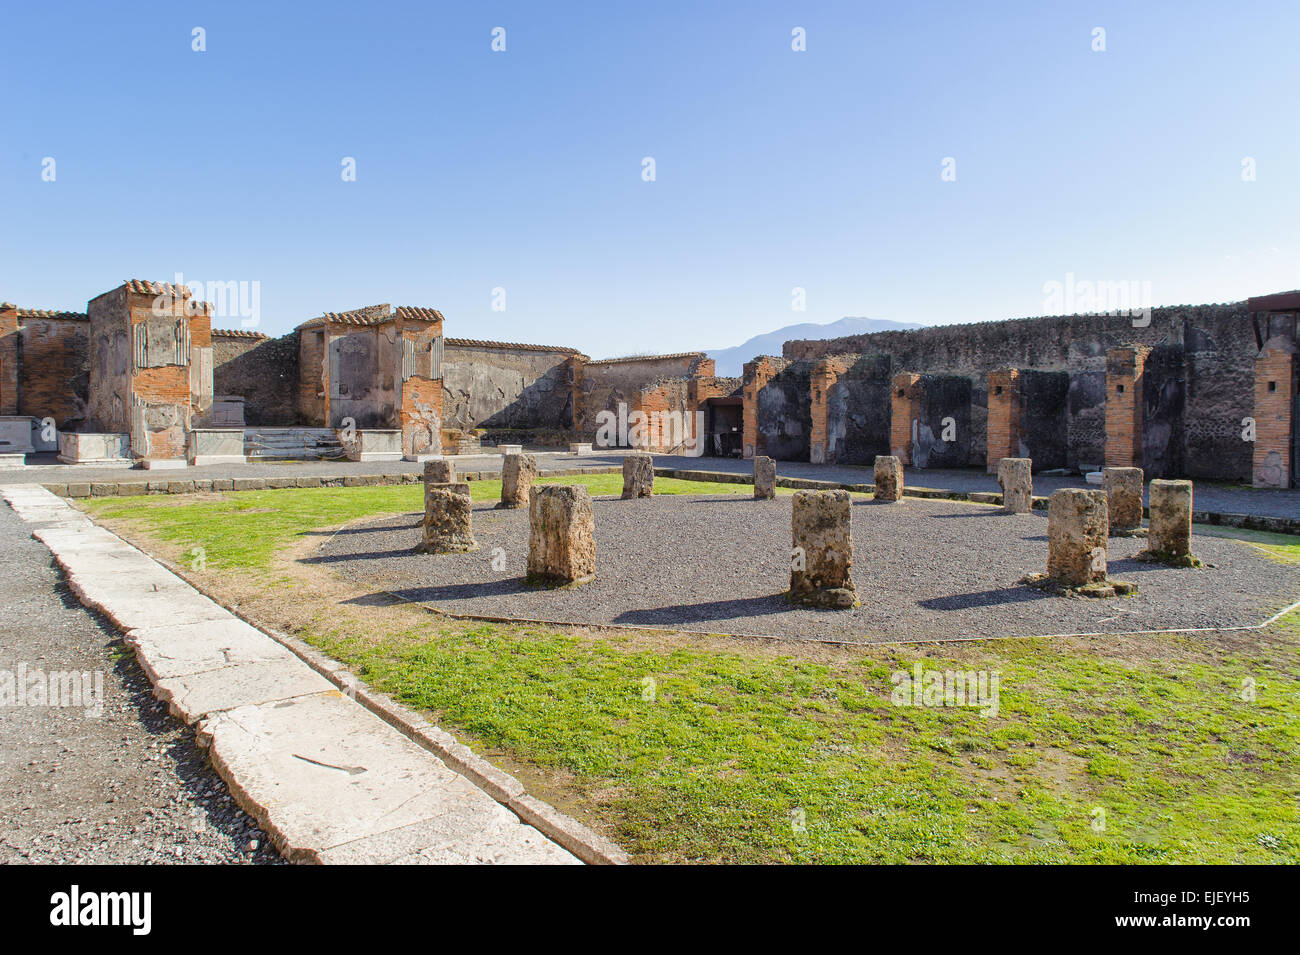 ruined market place in Pompeii. Pompeii is a ruin of acient Roman City near Naples in Italy. Stock Photo